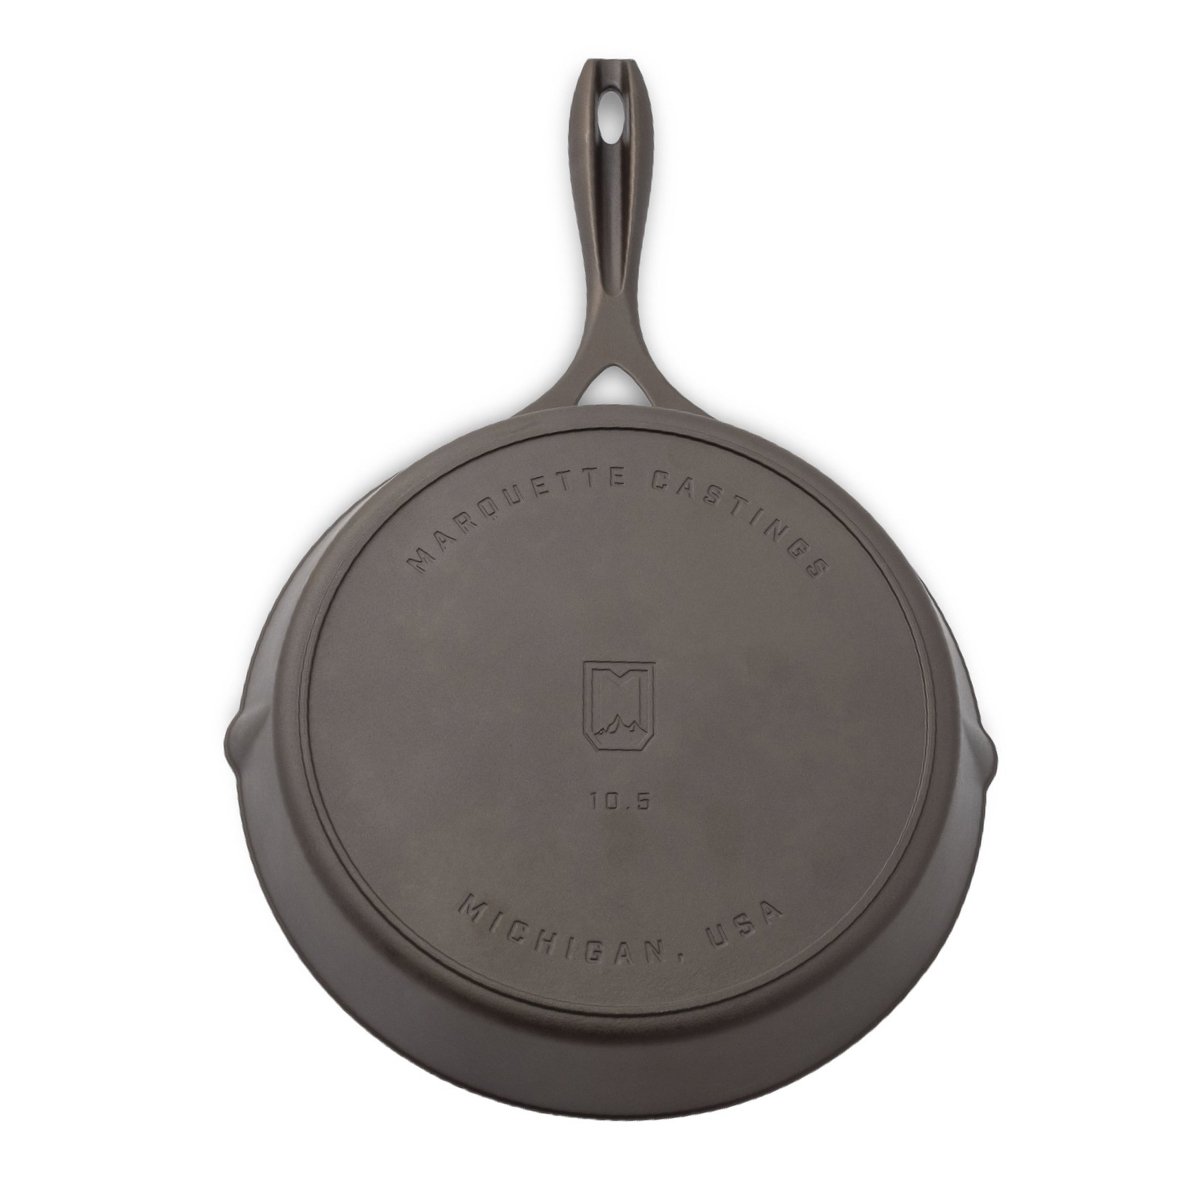 MARQUETTE CASTINGS  Dutch Ovens & Cookware